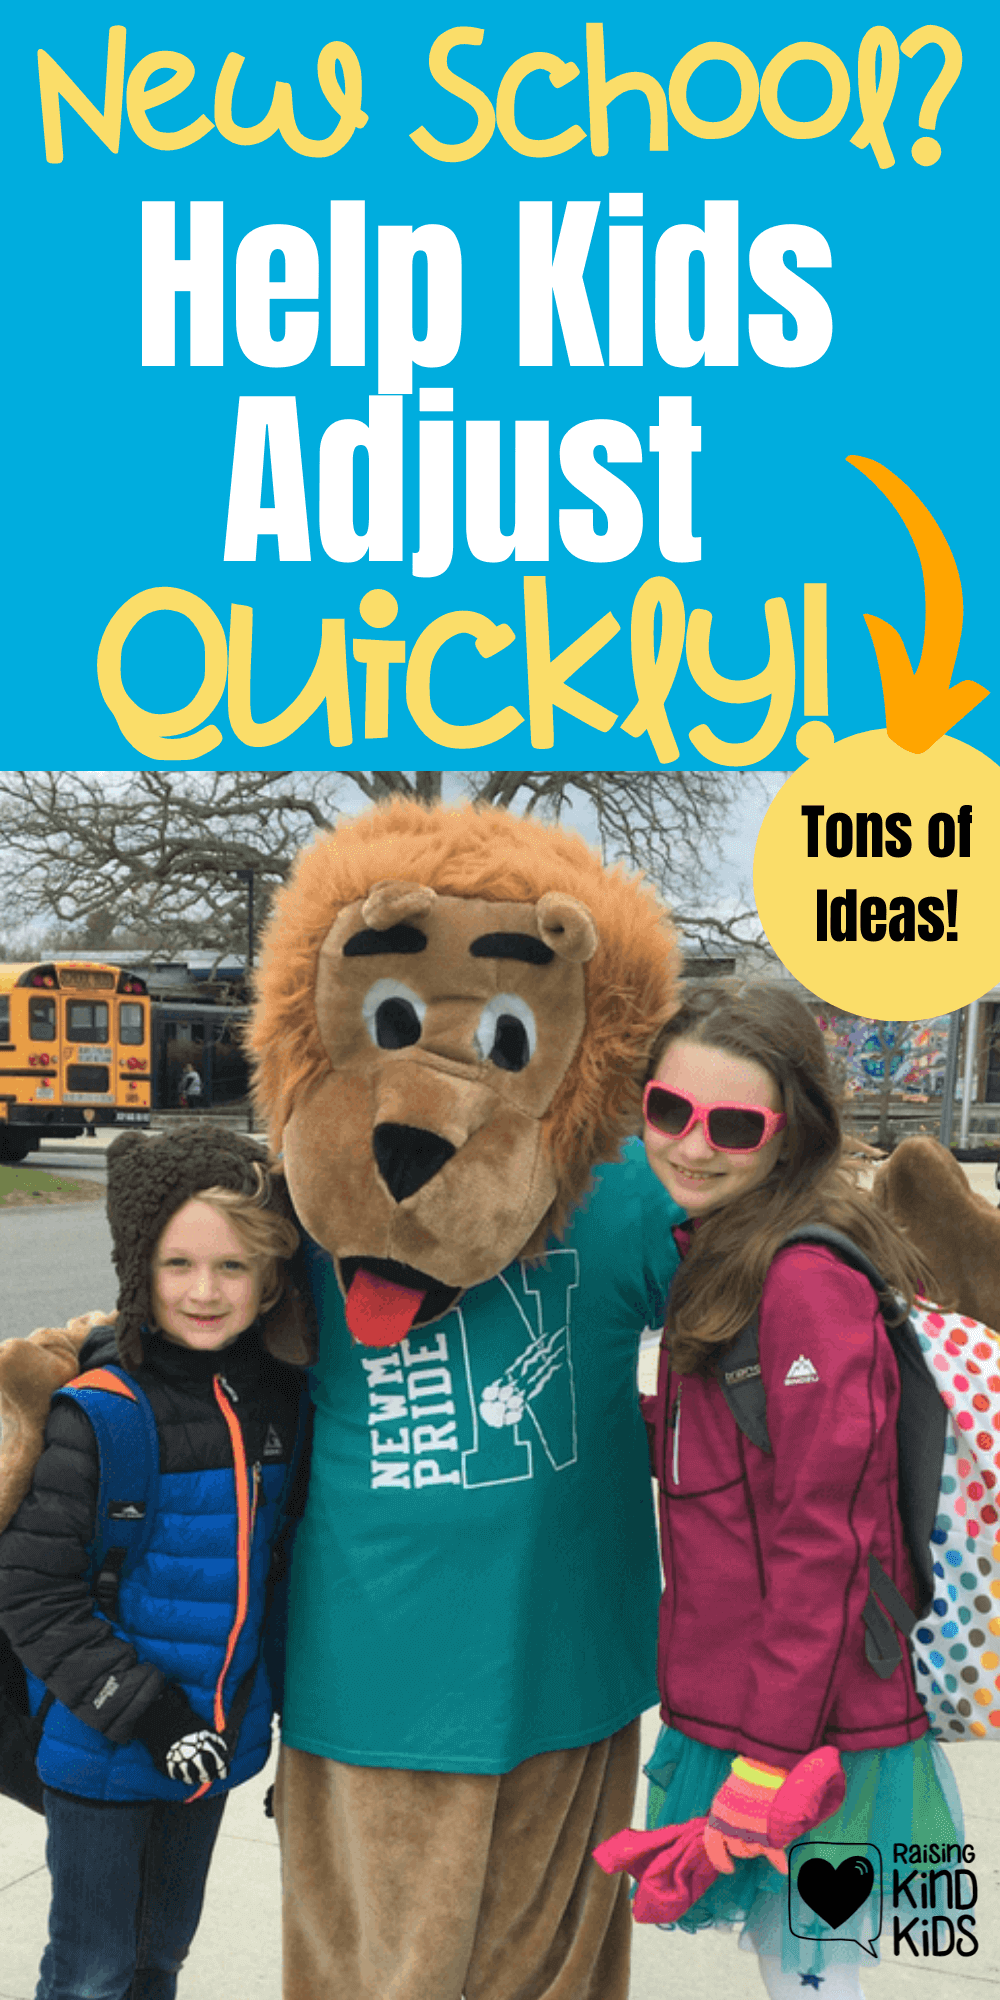 Help your kids adjust to a new school with this simple back to school tips and tricks #backtoschool #backtoschooltips #newkidatschool #newschool #coffeeandcarpool #backtoschool #newkid